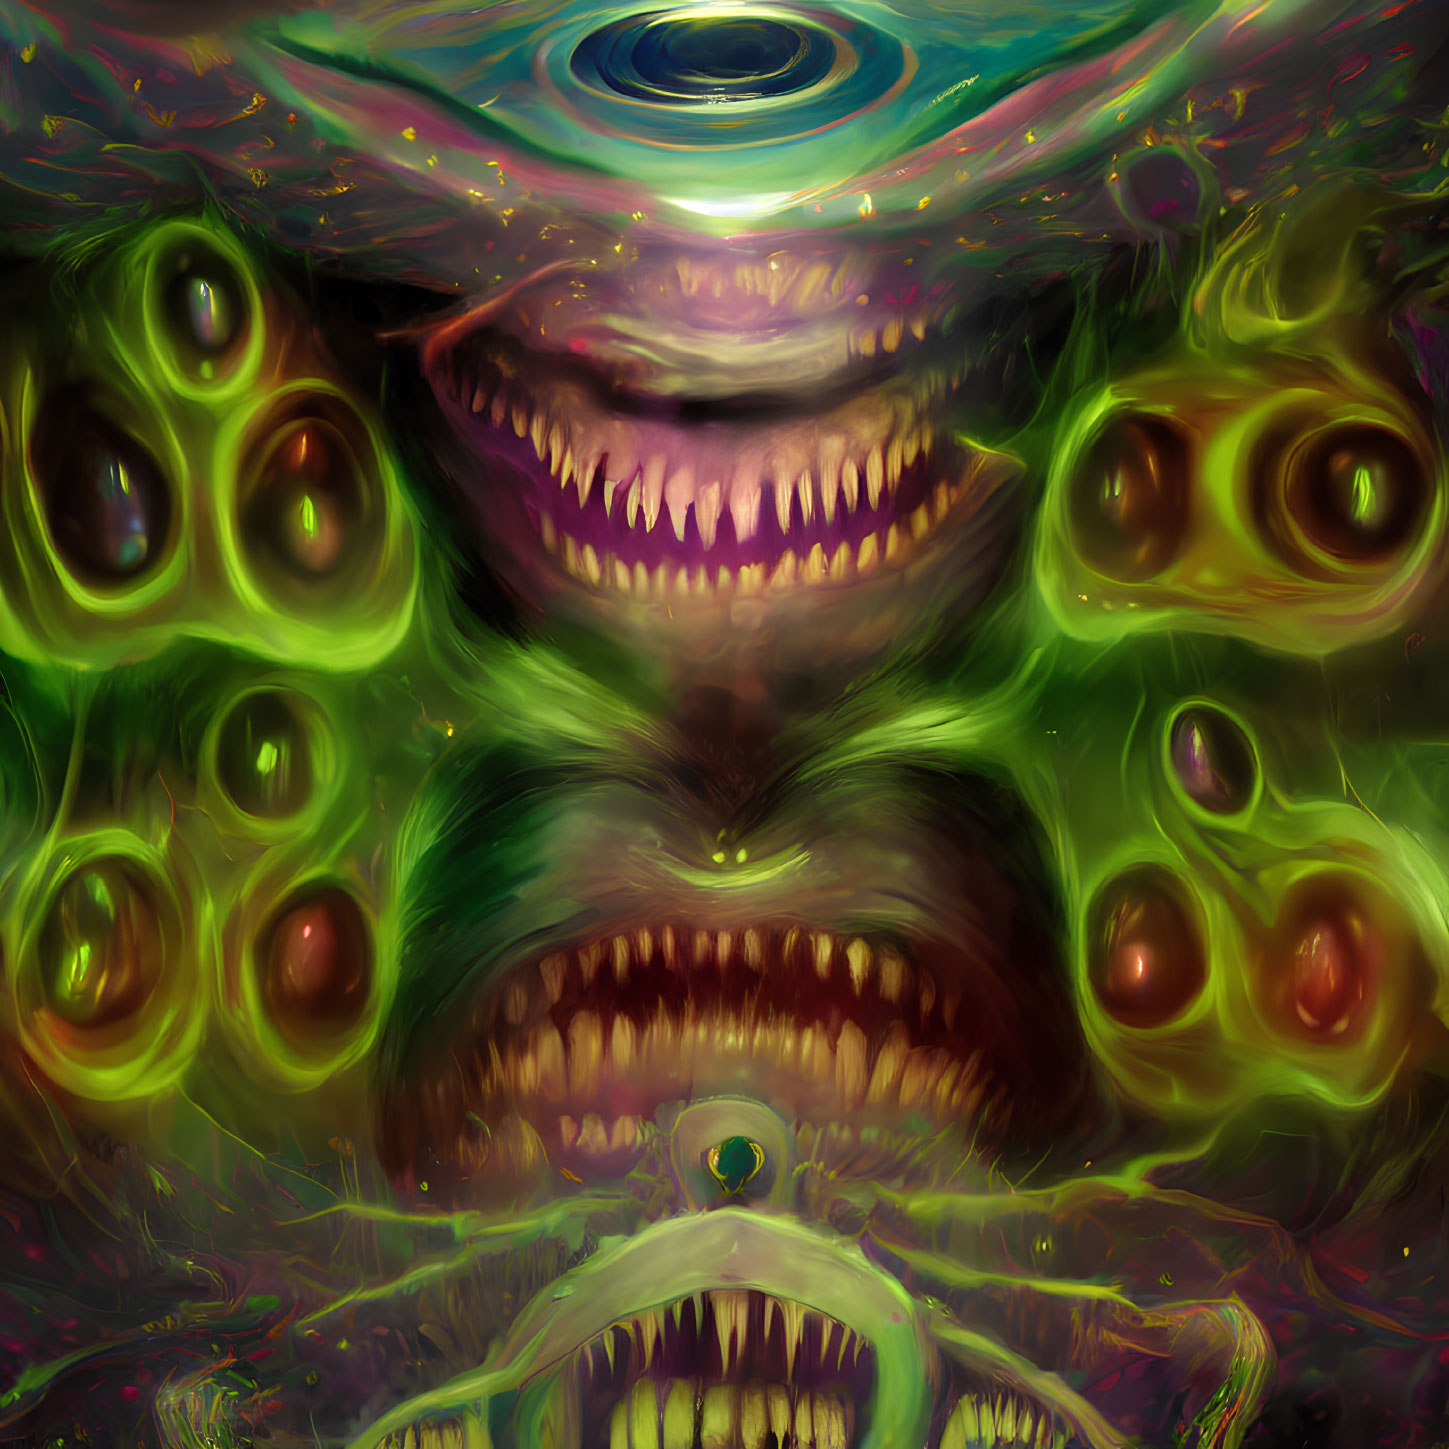 Colorful psychedelic artwork with monstrous faces and swirling patterns